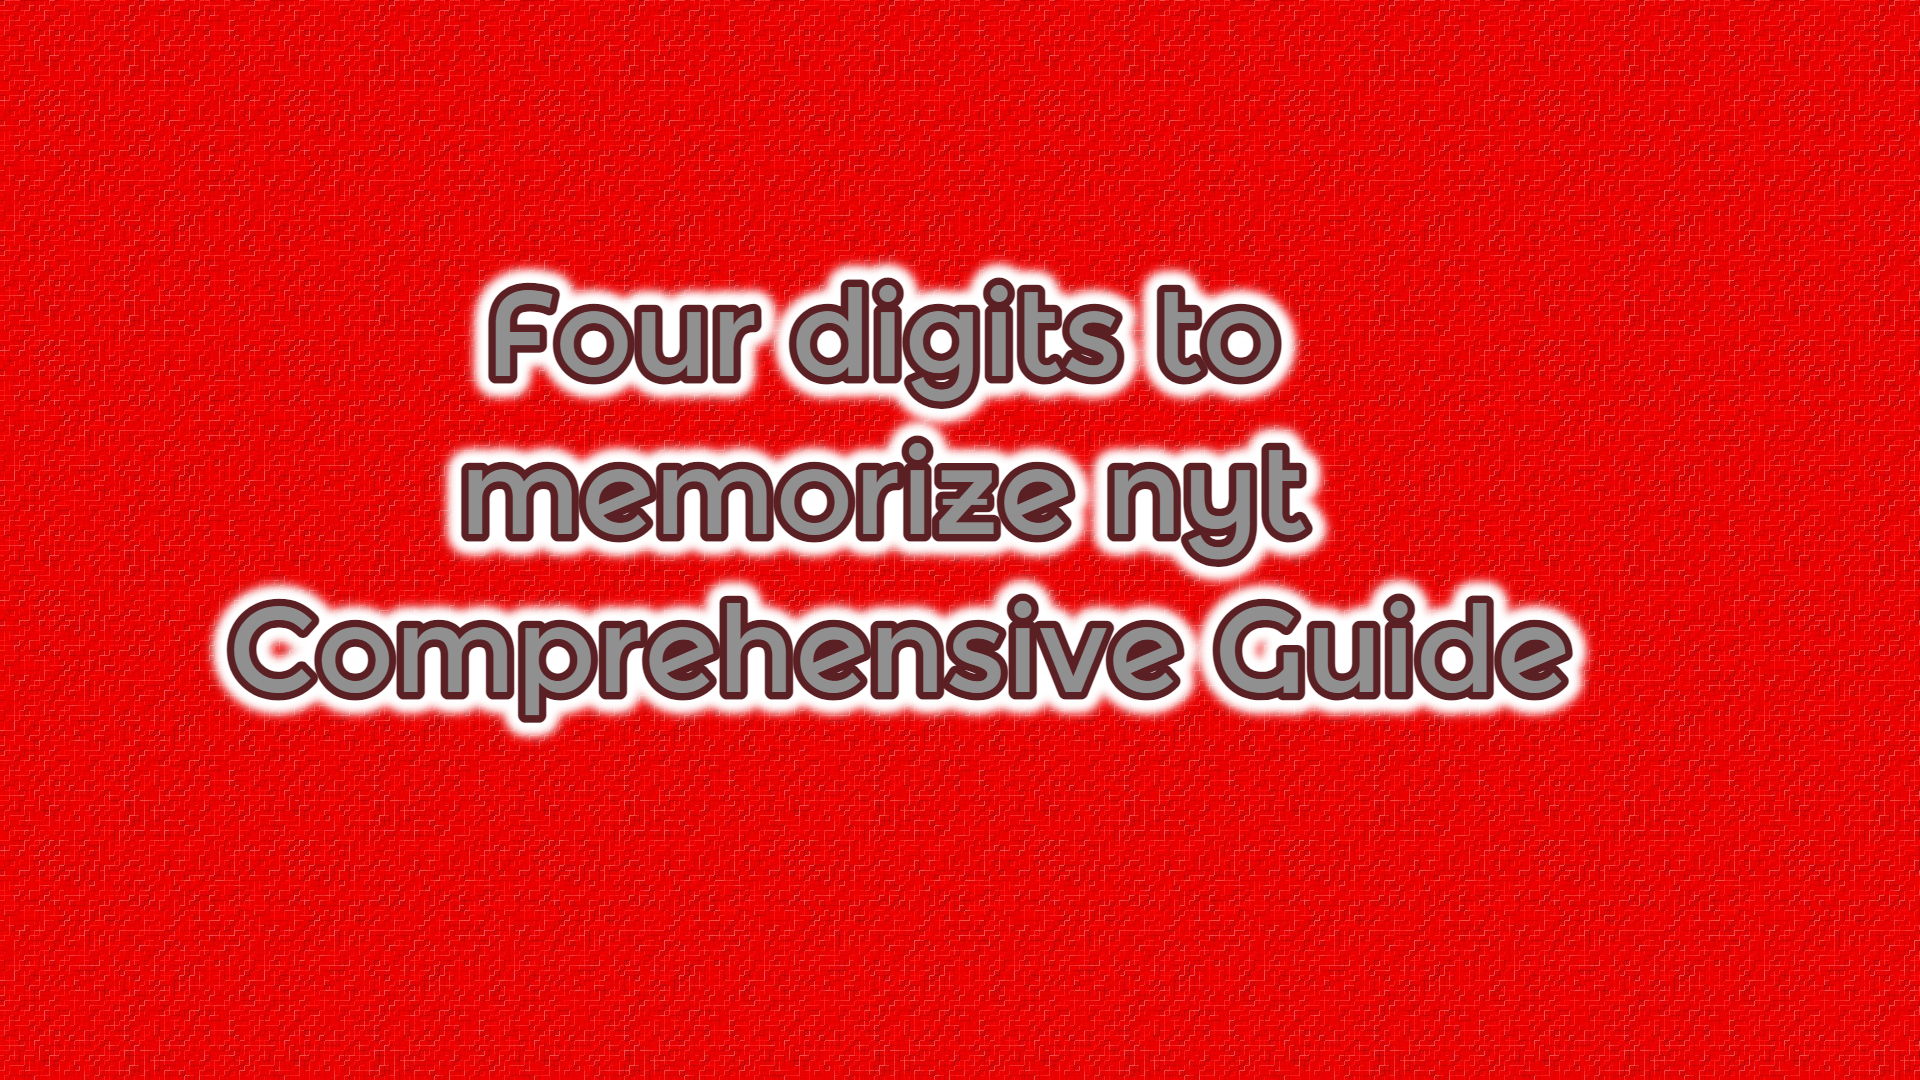 Four digits to memorize nyt Comprehensive Guide